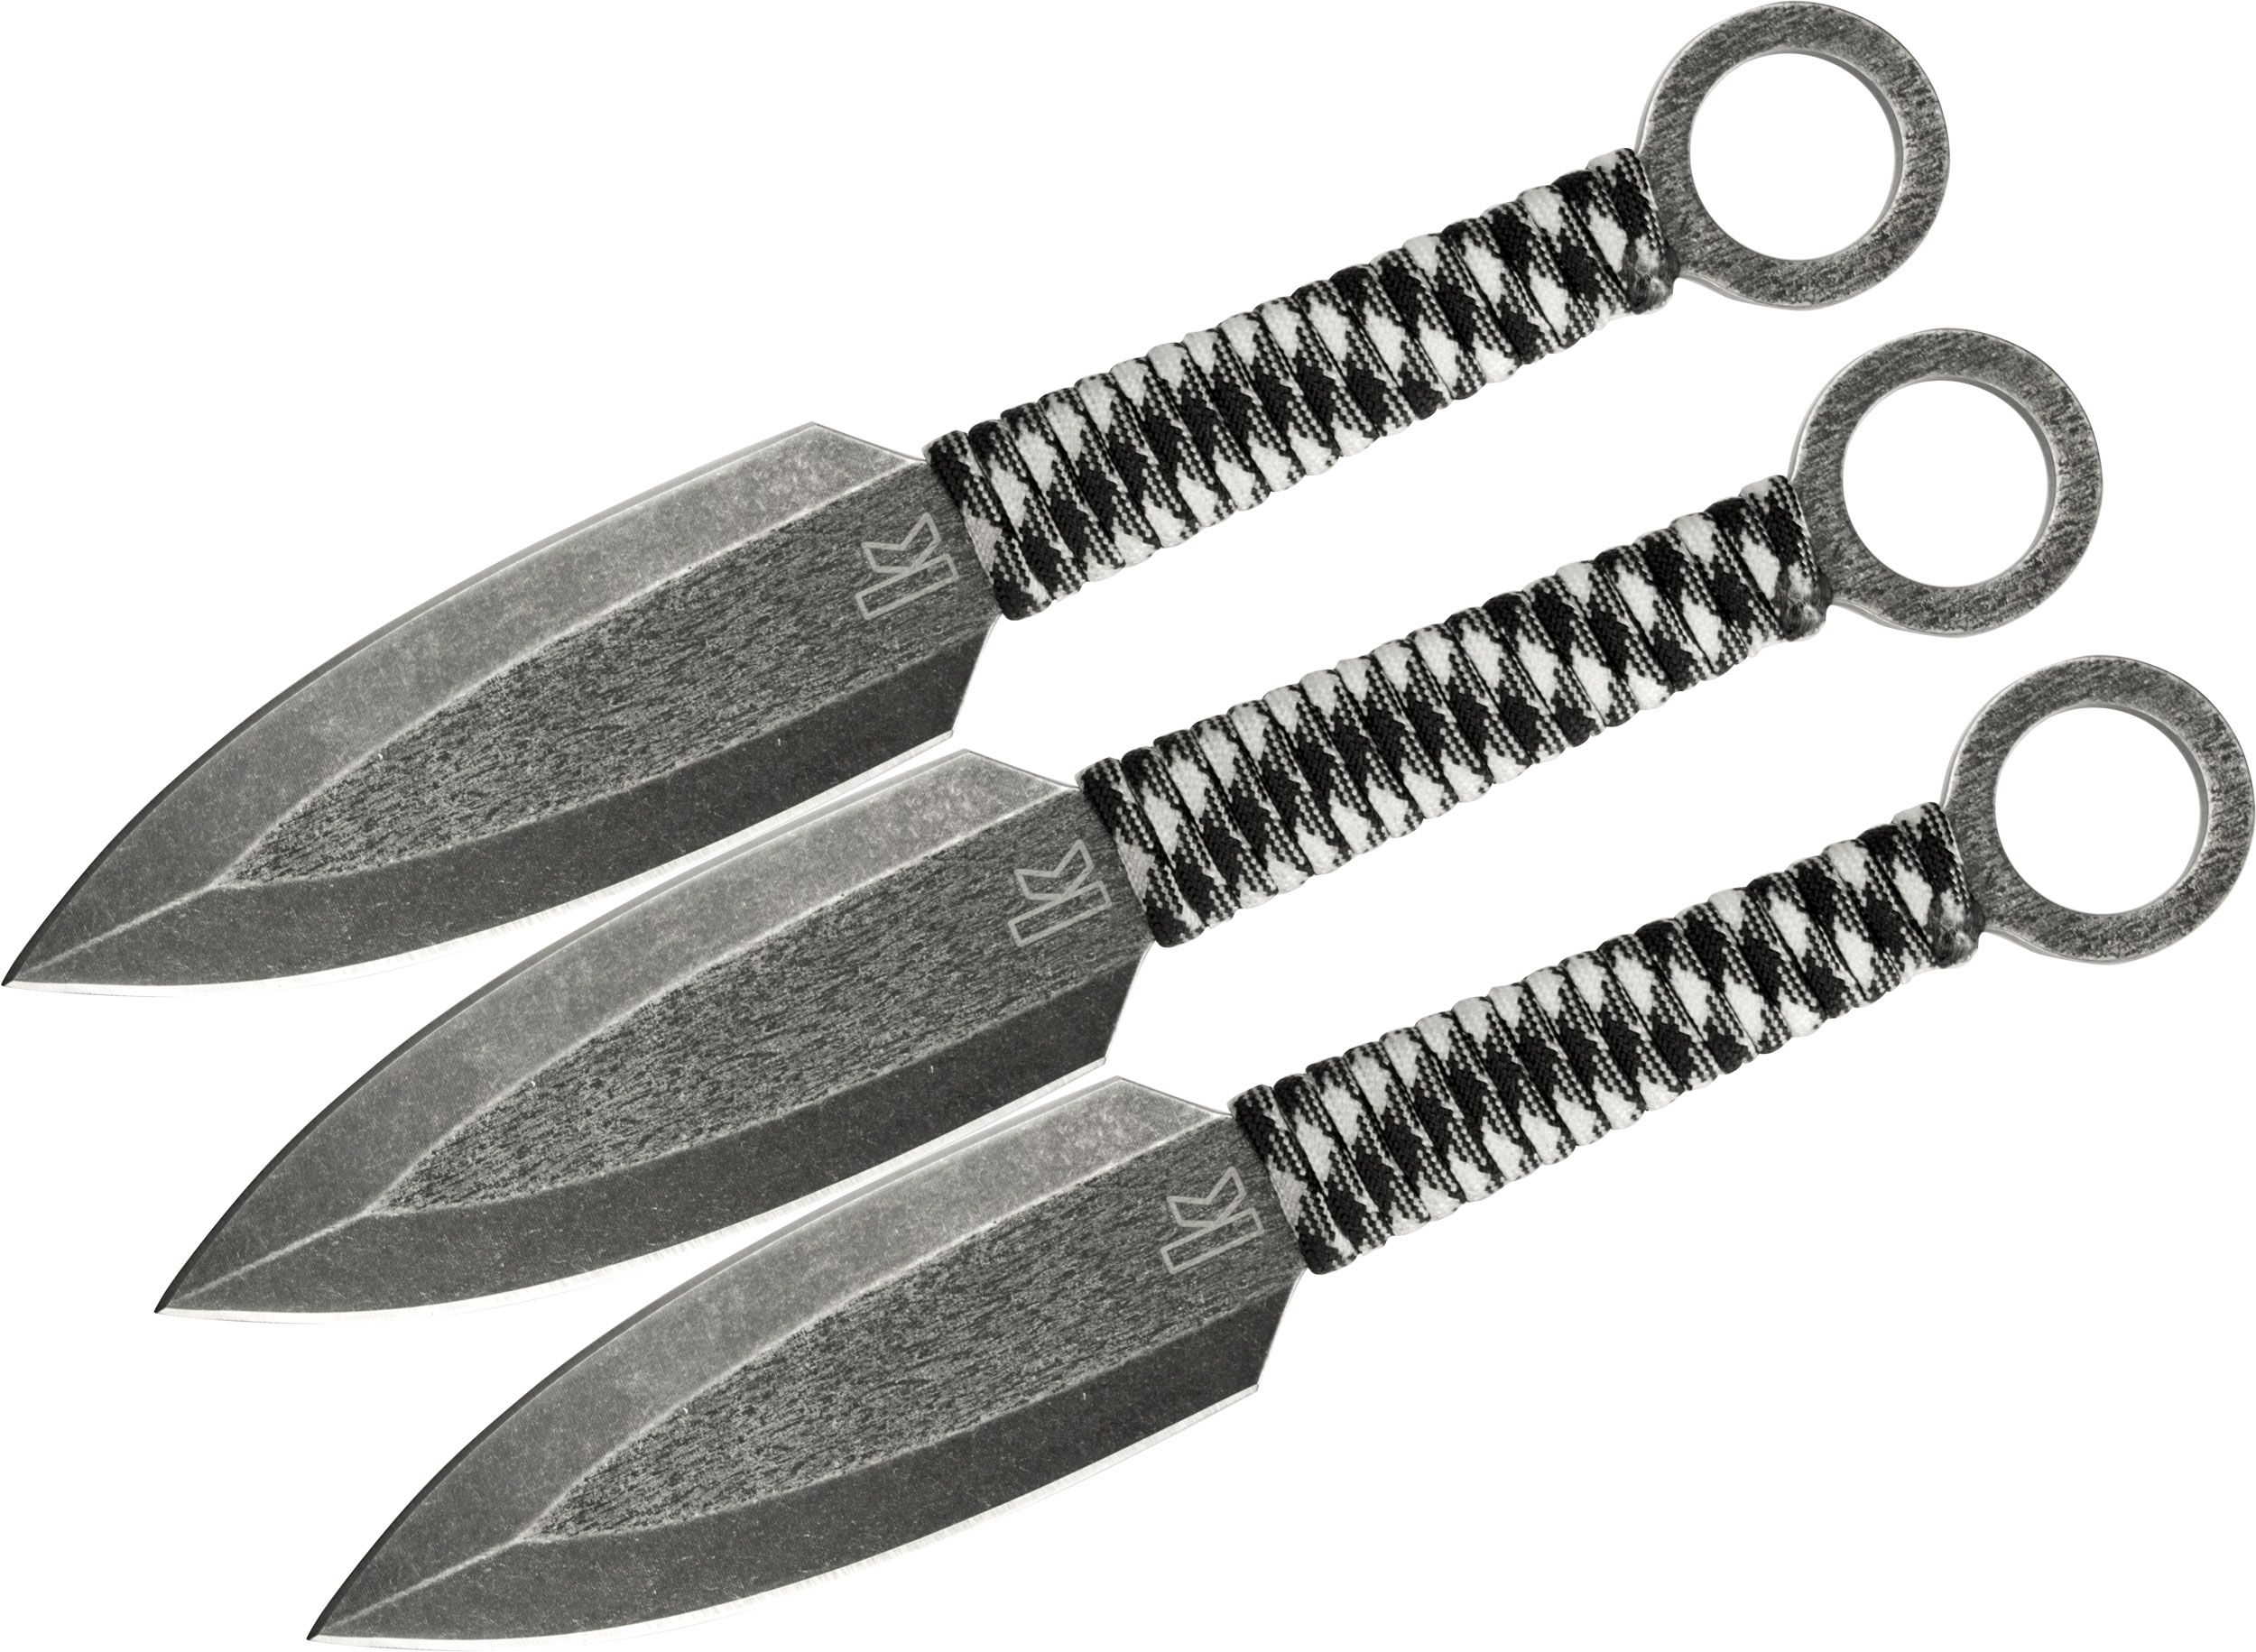 7 Throwing knifs ideas - throwing knives, knife, knives and swords